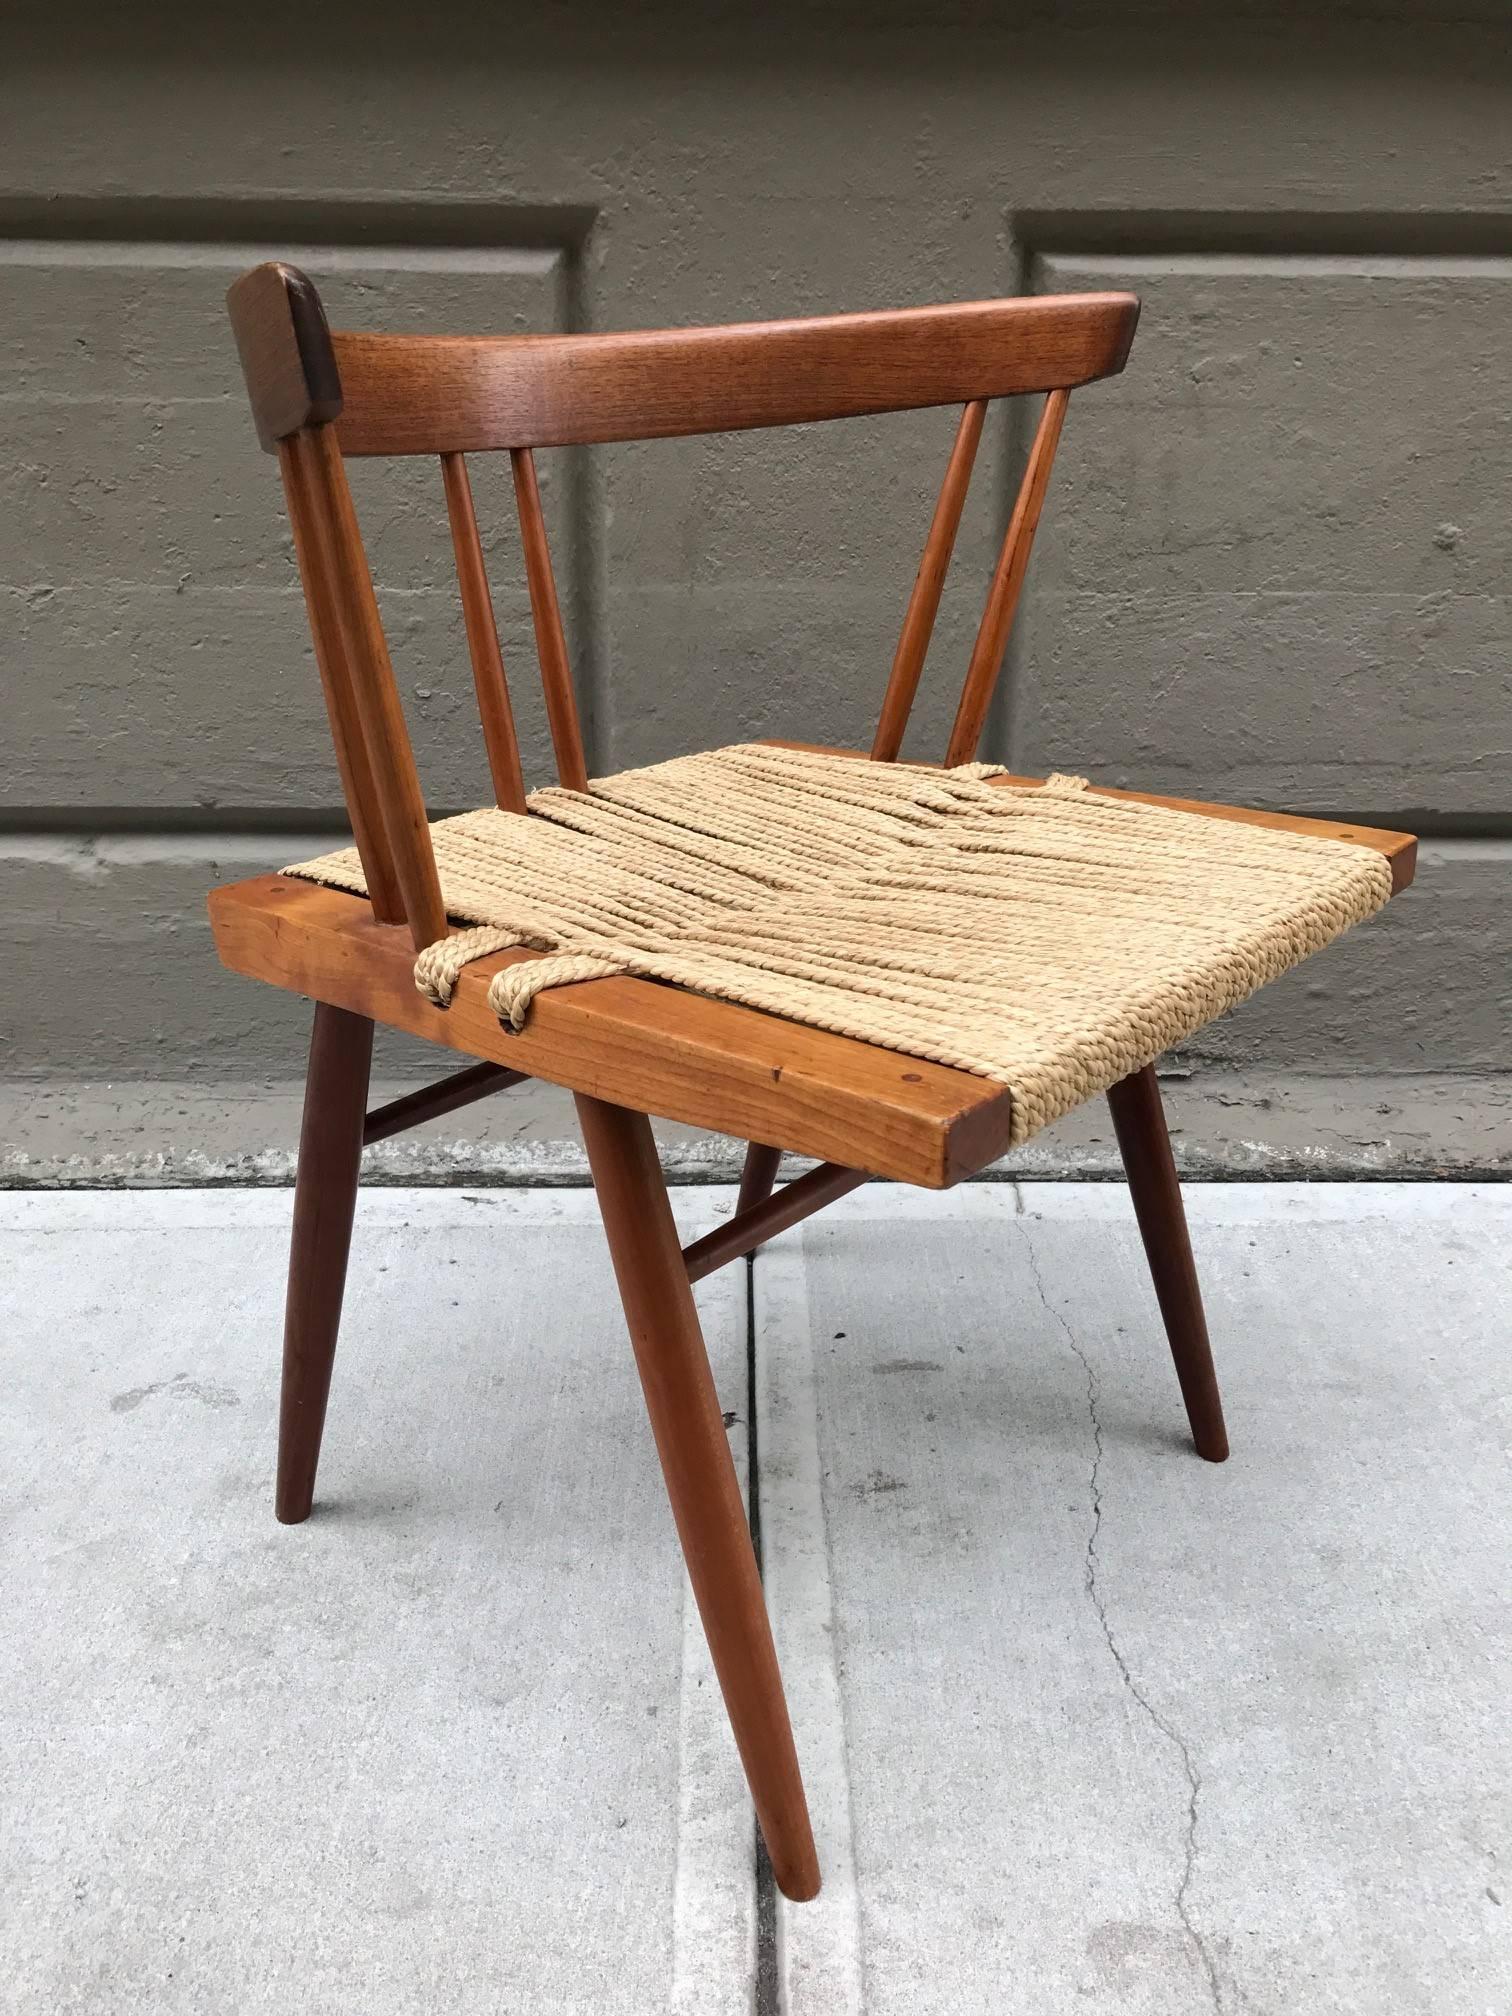 George Nakashima woven grass rope seat chairs with walnut frames.